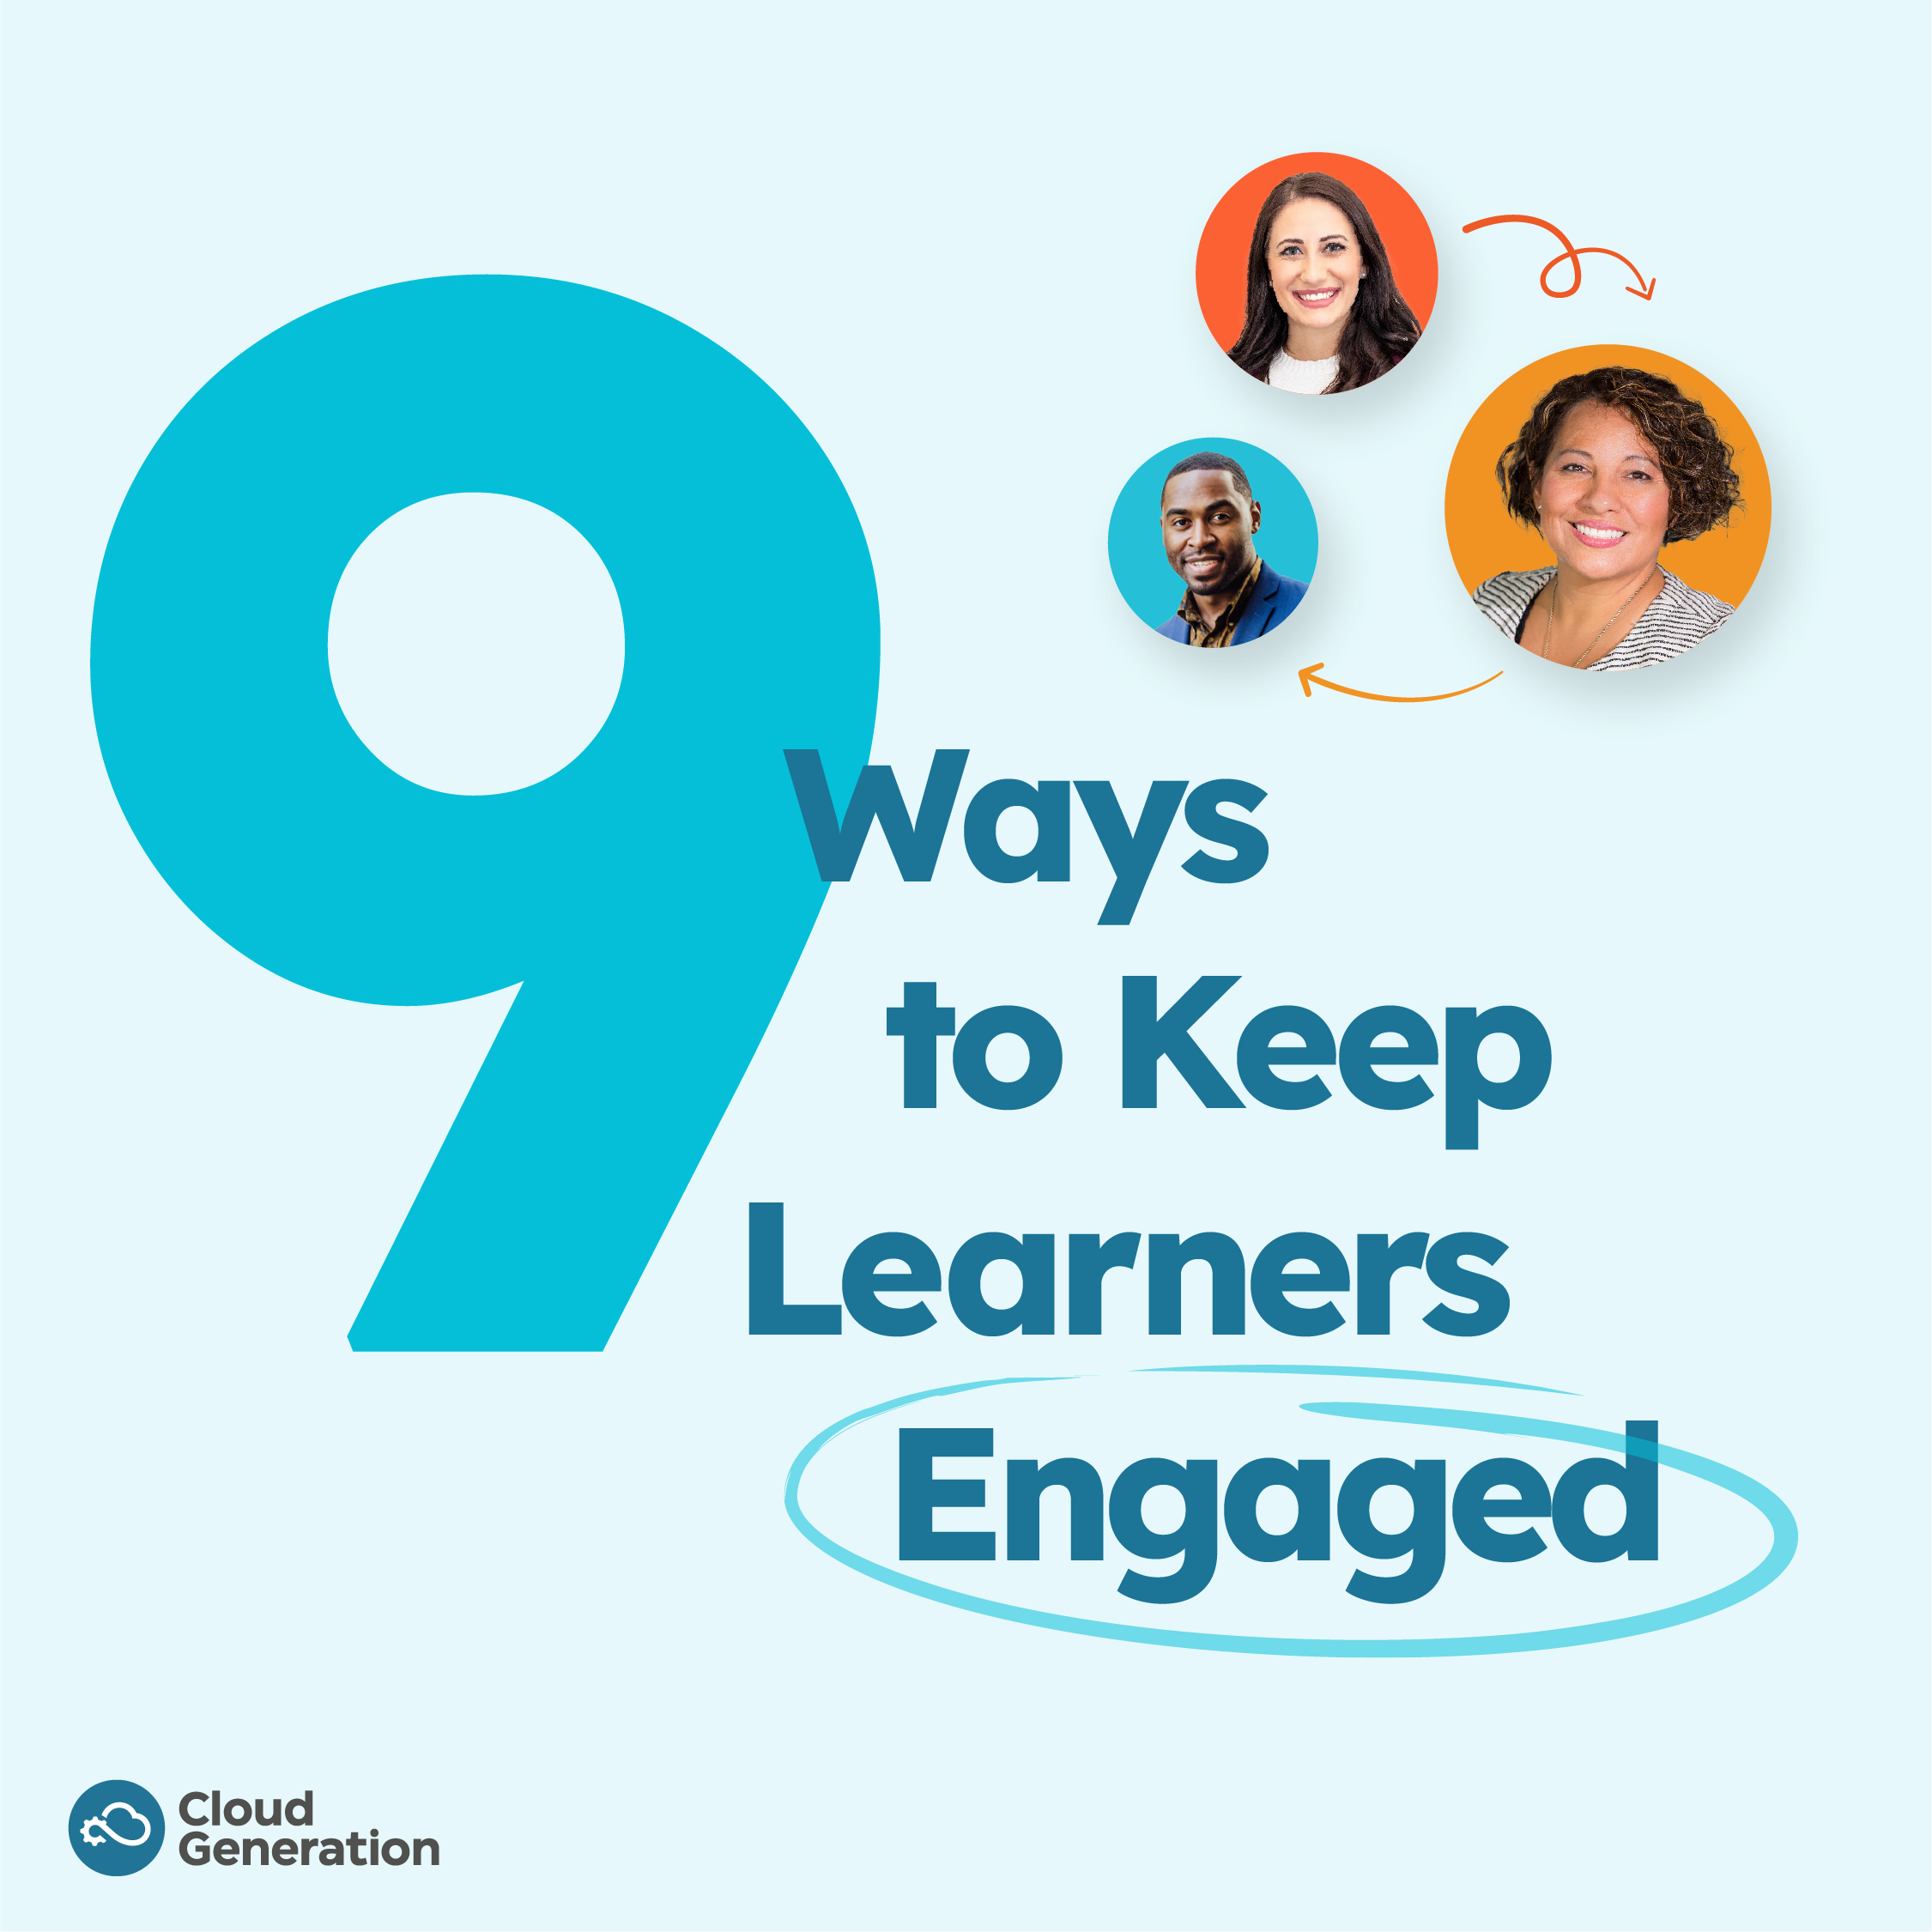 9 Ways to Keep Learners Engaged